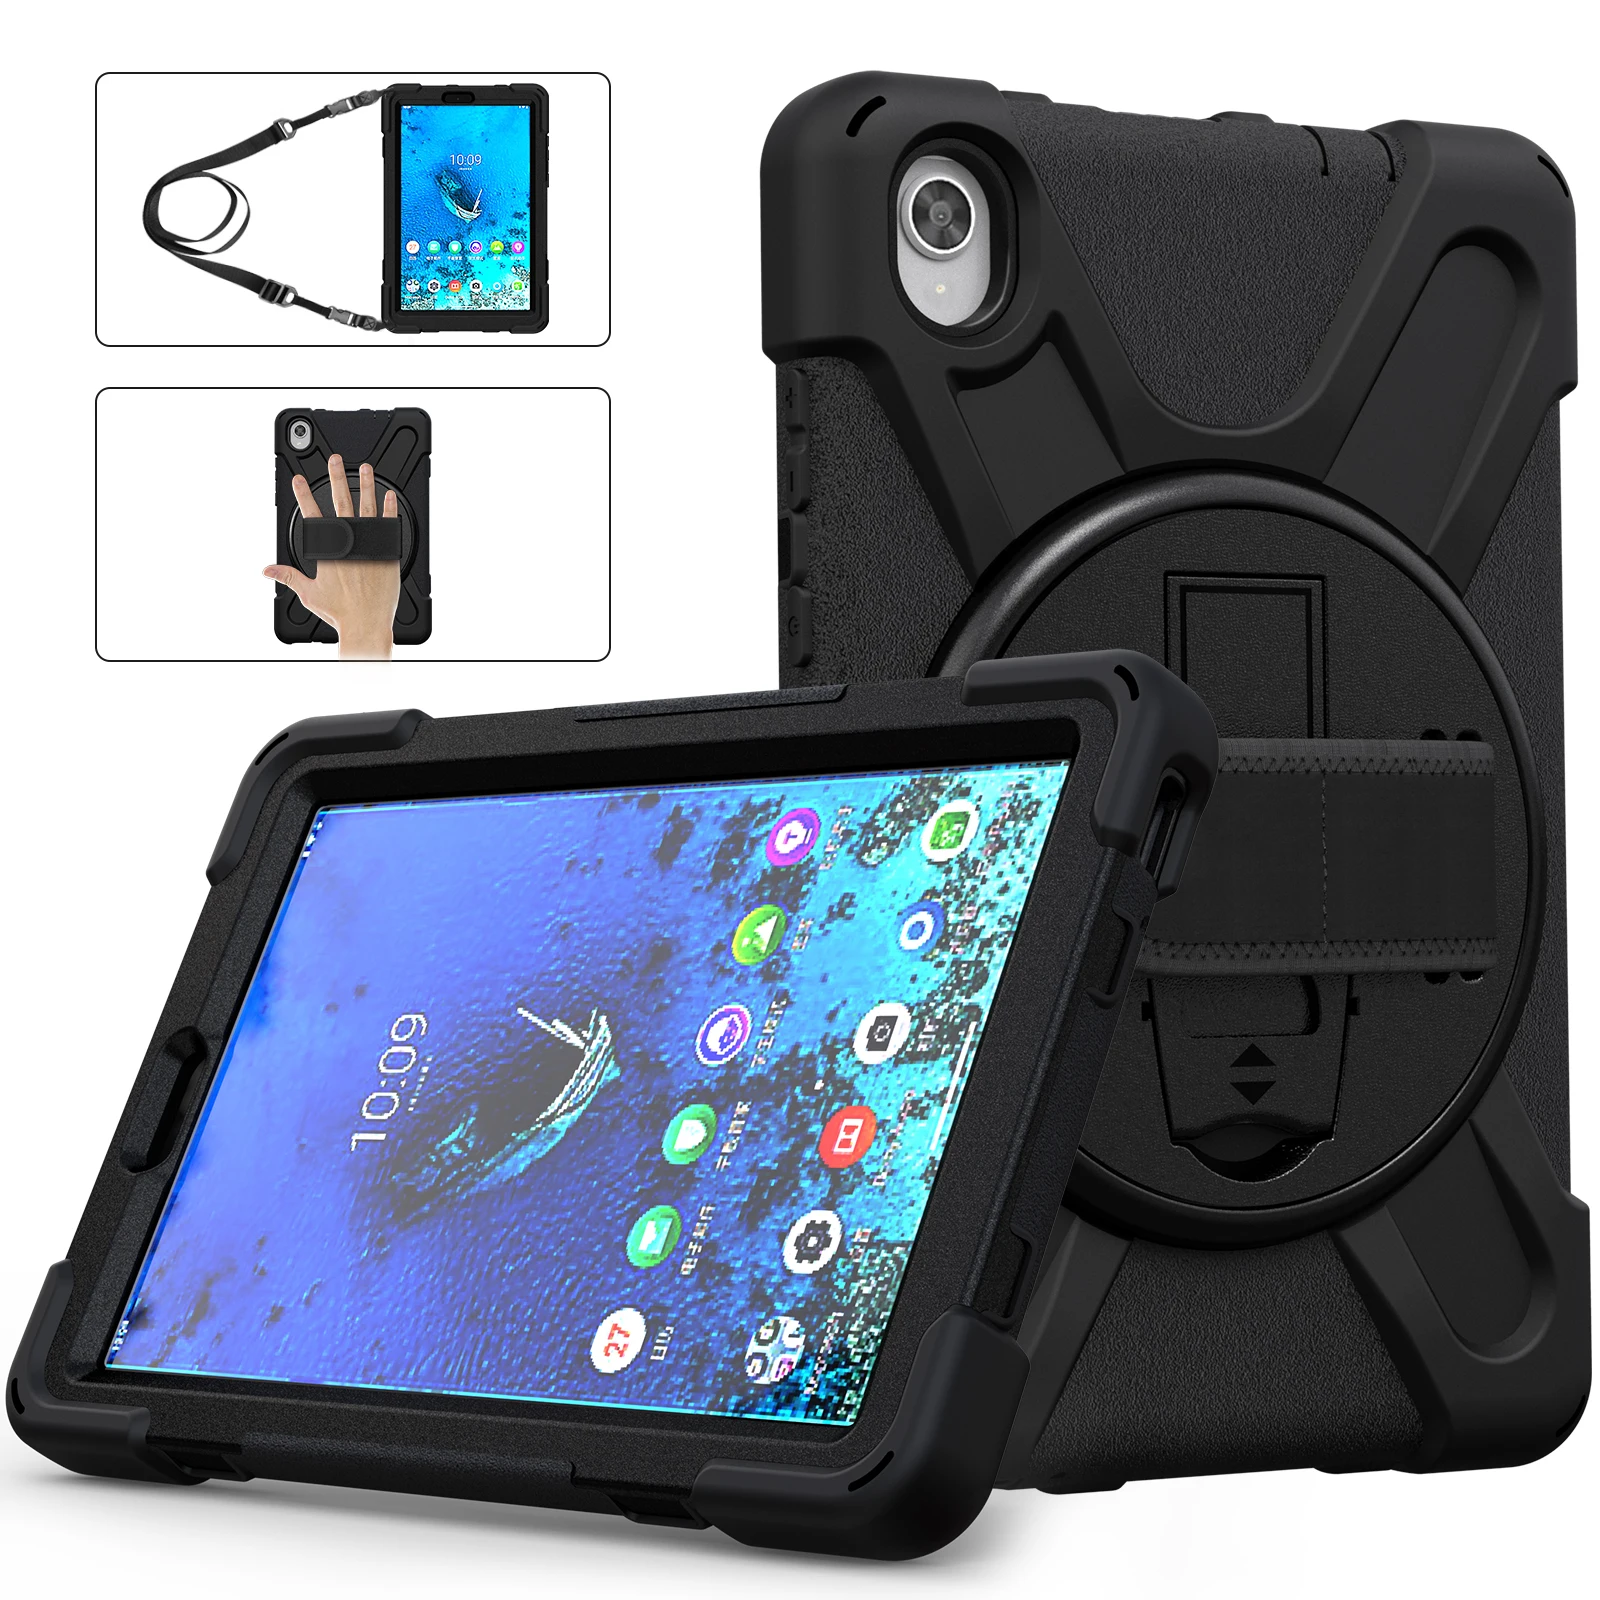 

Case for Lenovo M8/M8 FHD/M8 3rd Gen M10 HD P11/P11 Plus/P11 Pro 3-Layer Protective Cover Shockproof Hand/Shoudler Strap Funda